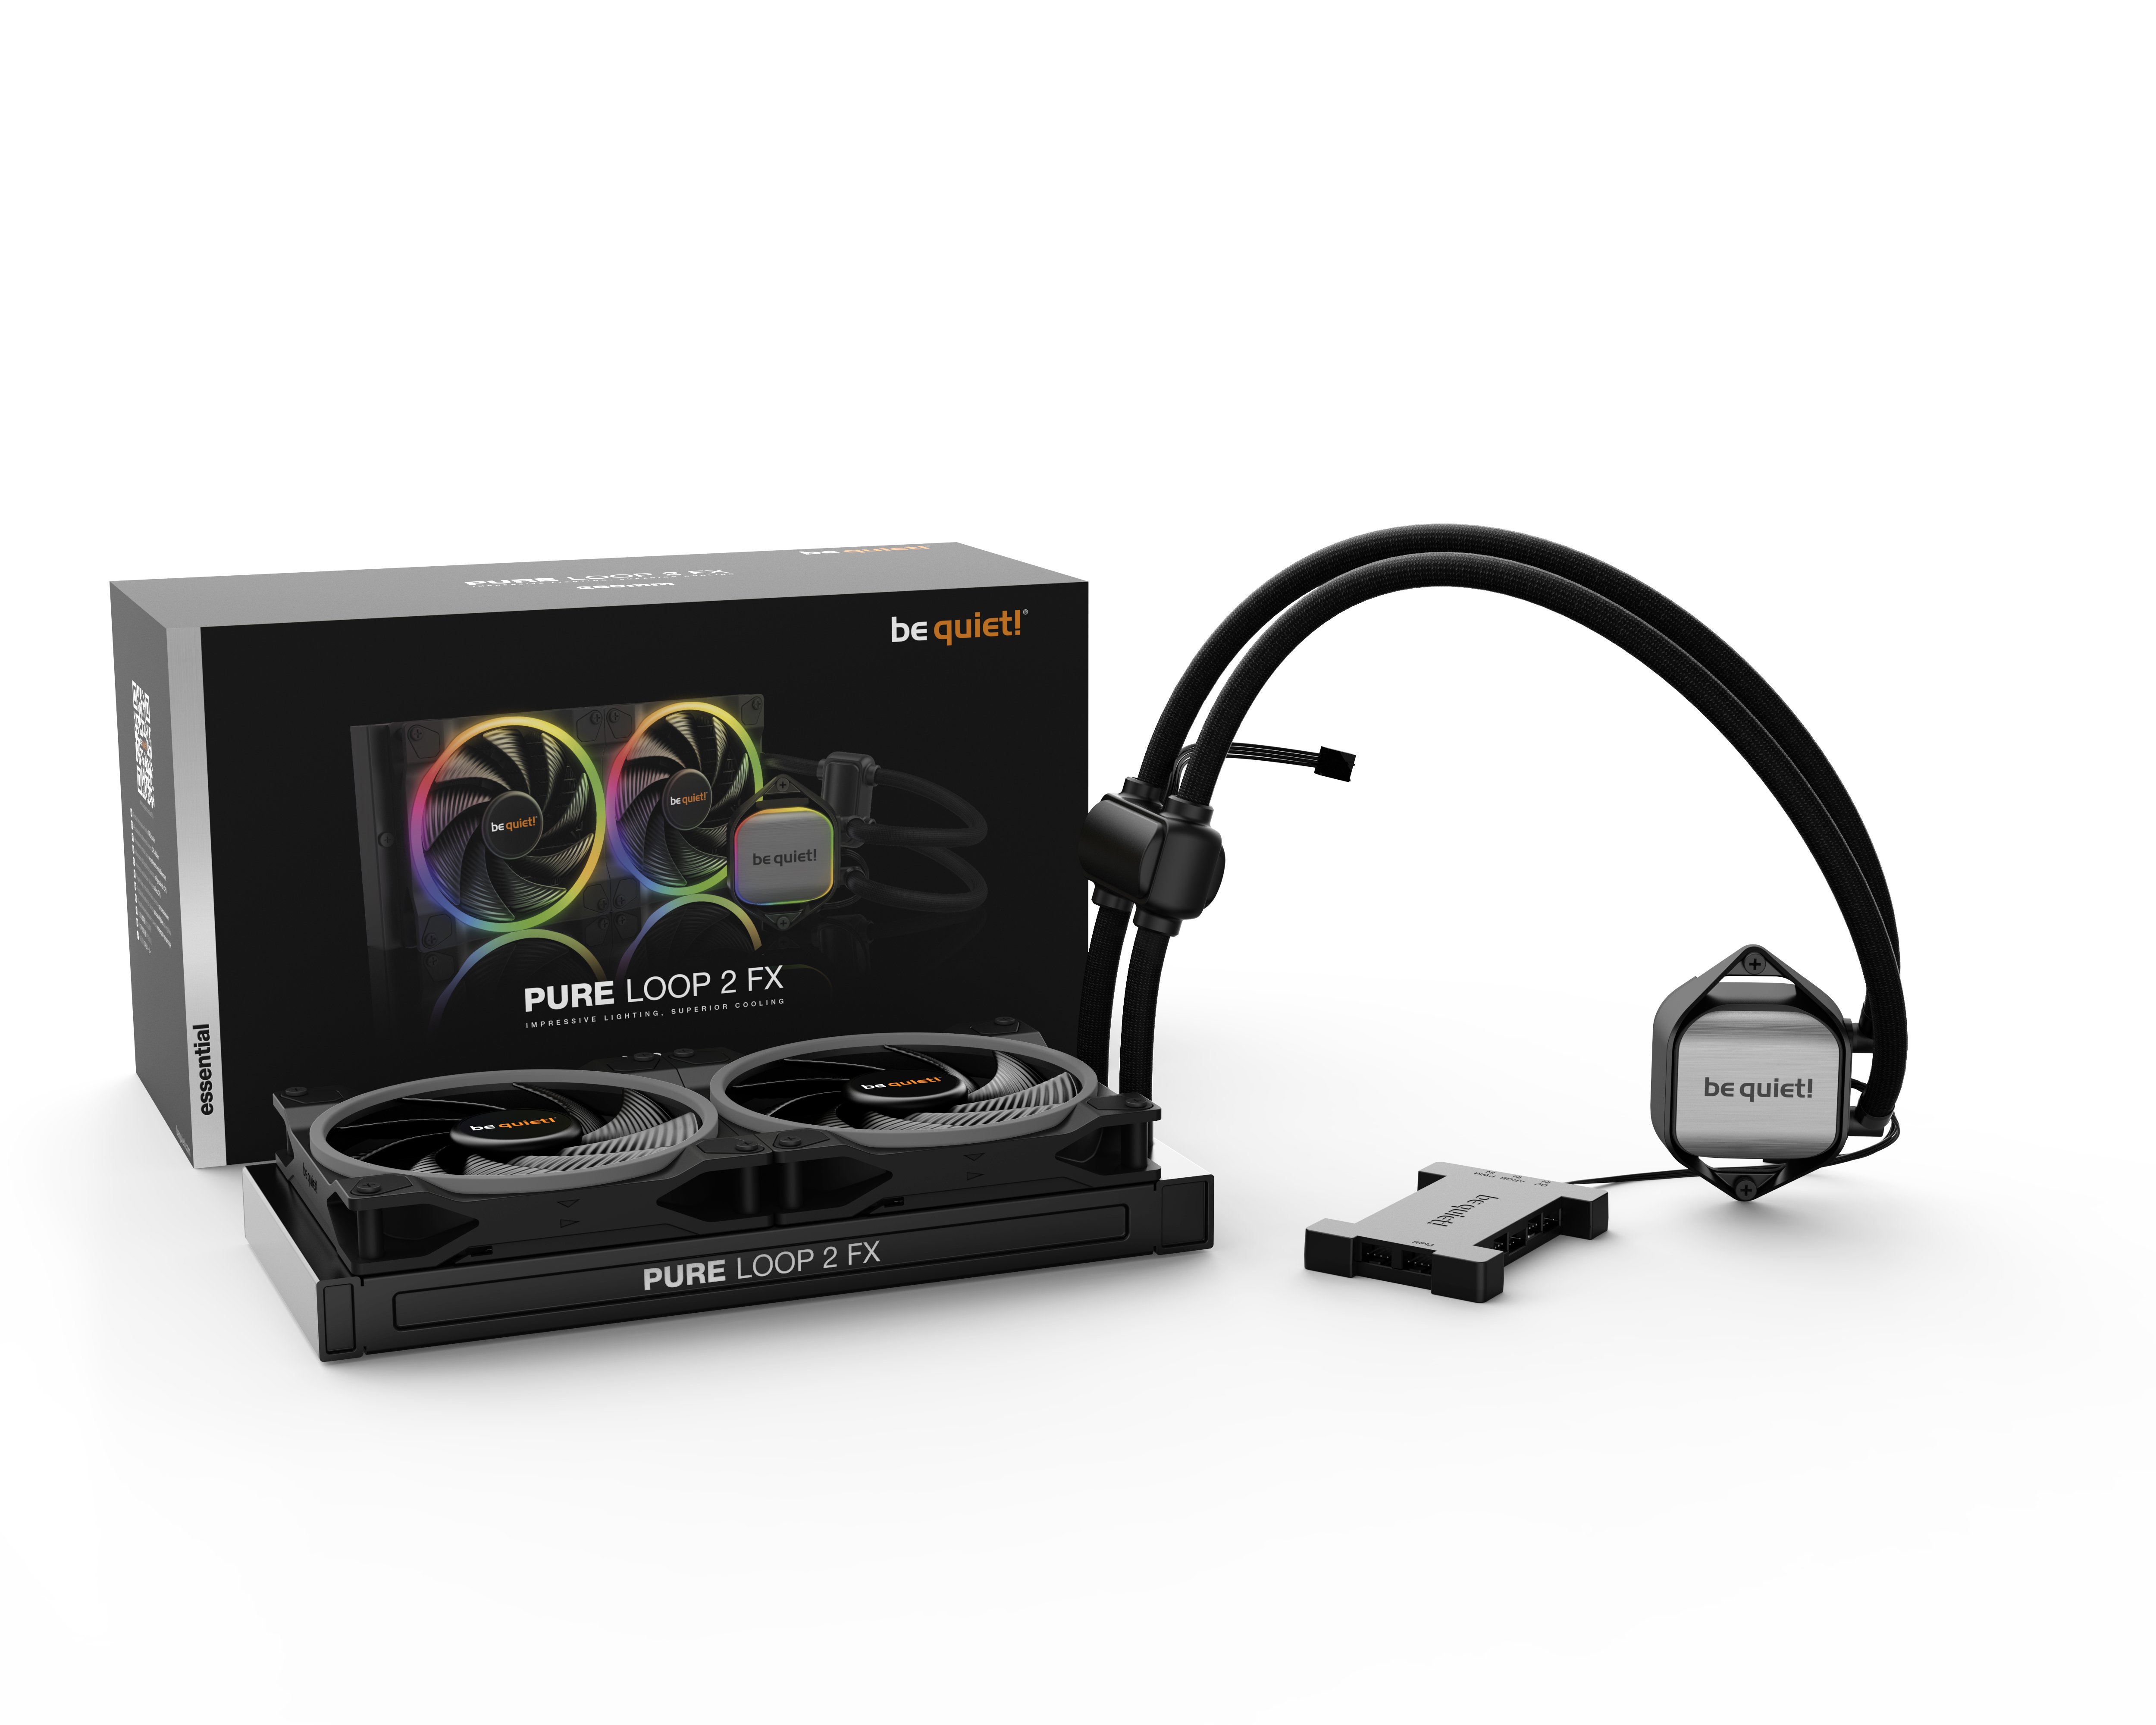 be quiet! PURE LOOP 2 FX 280mm AIO CPU Water Cooler | High Performance AIO  | 2 Light Wings 140mm PWM high-speed fans | ARGB Hub | Refillable Port | 